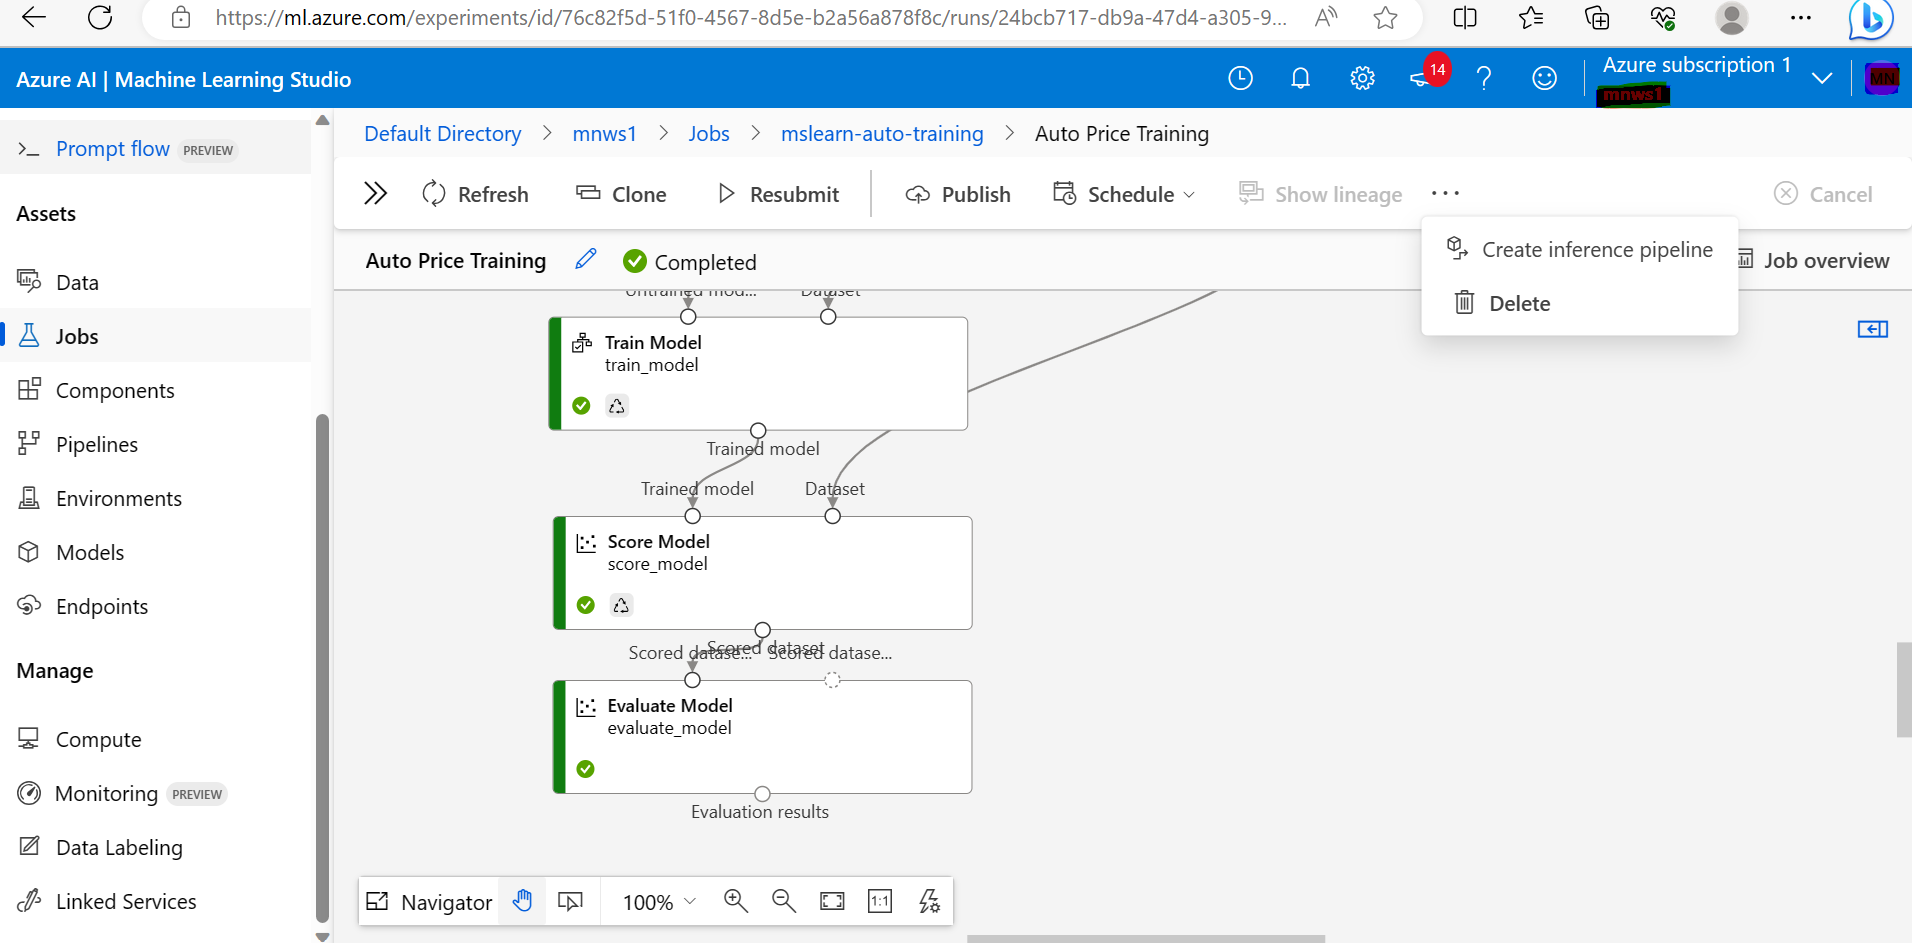 Azure create inference pipeline issue